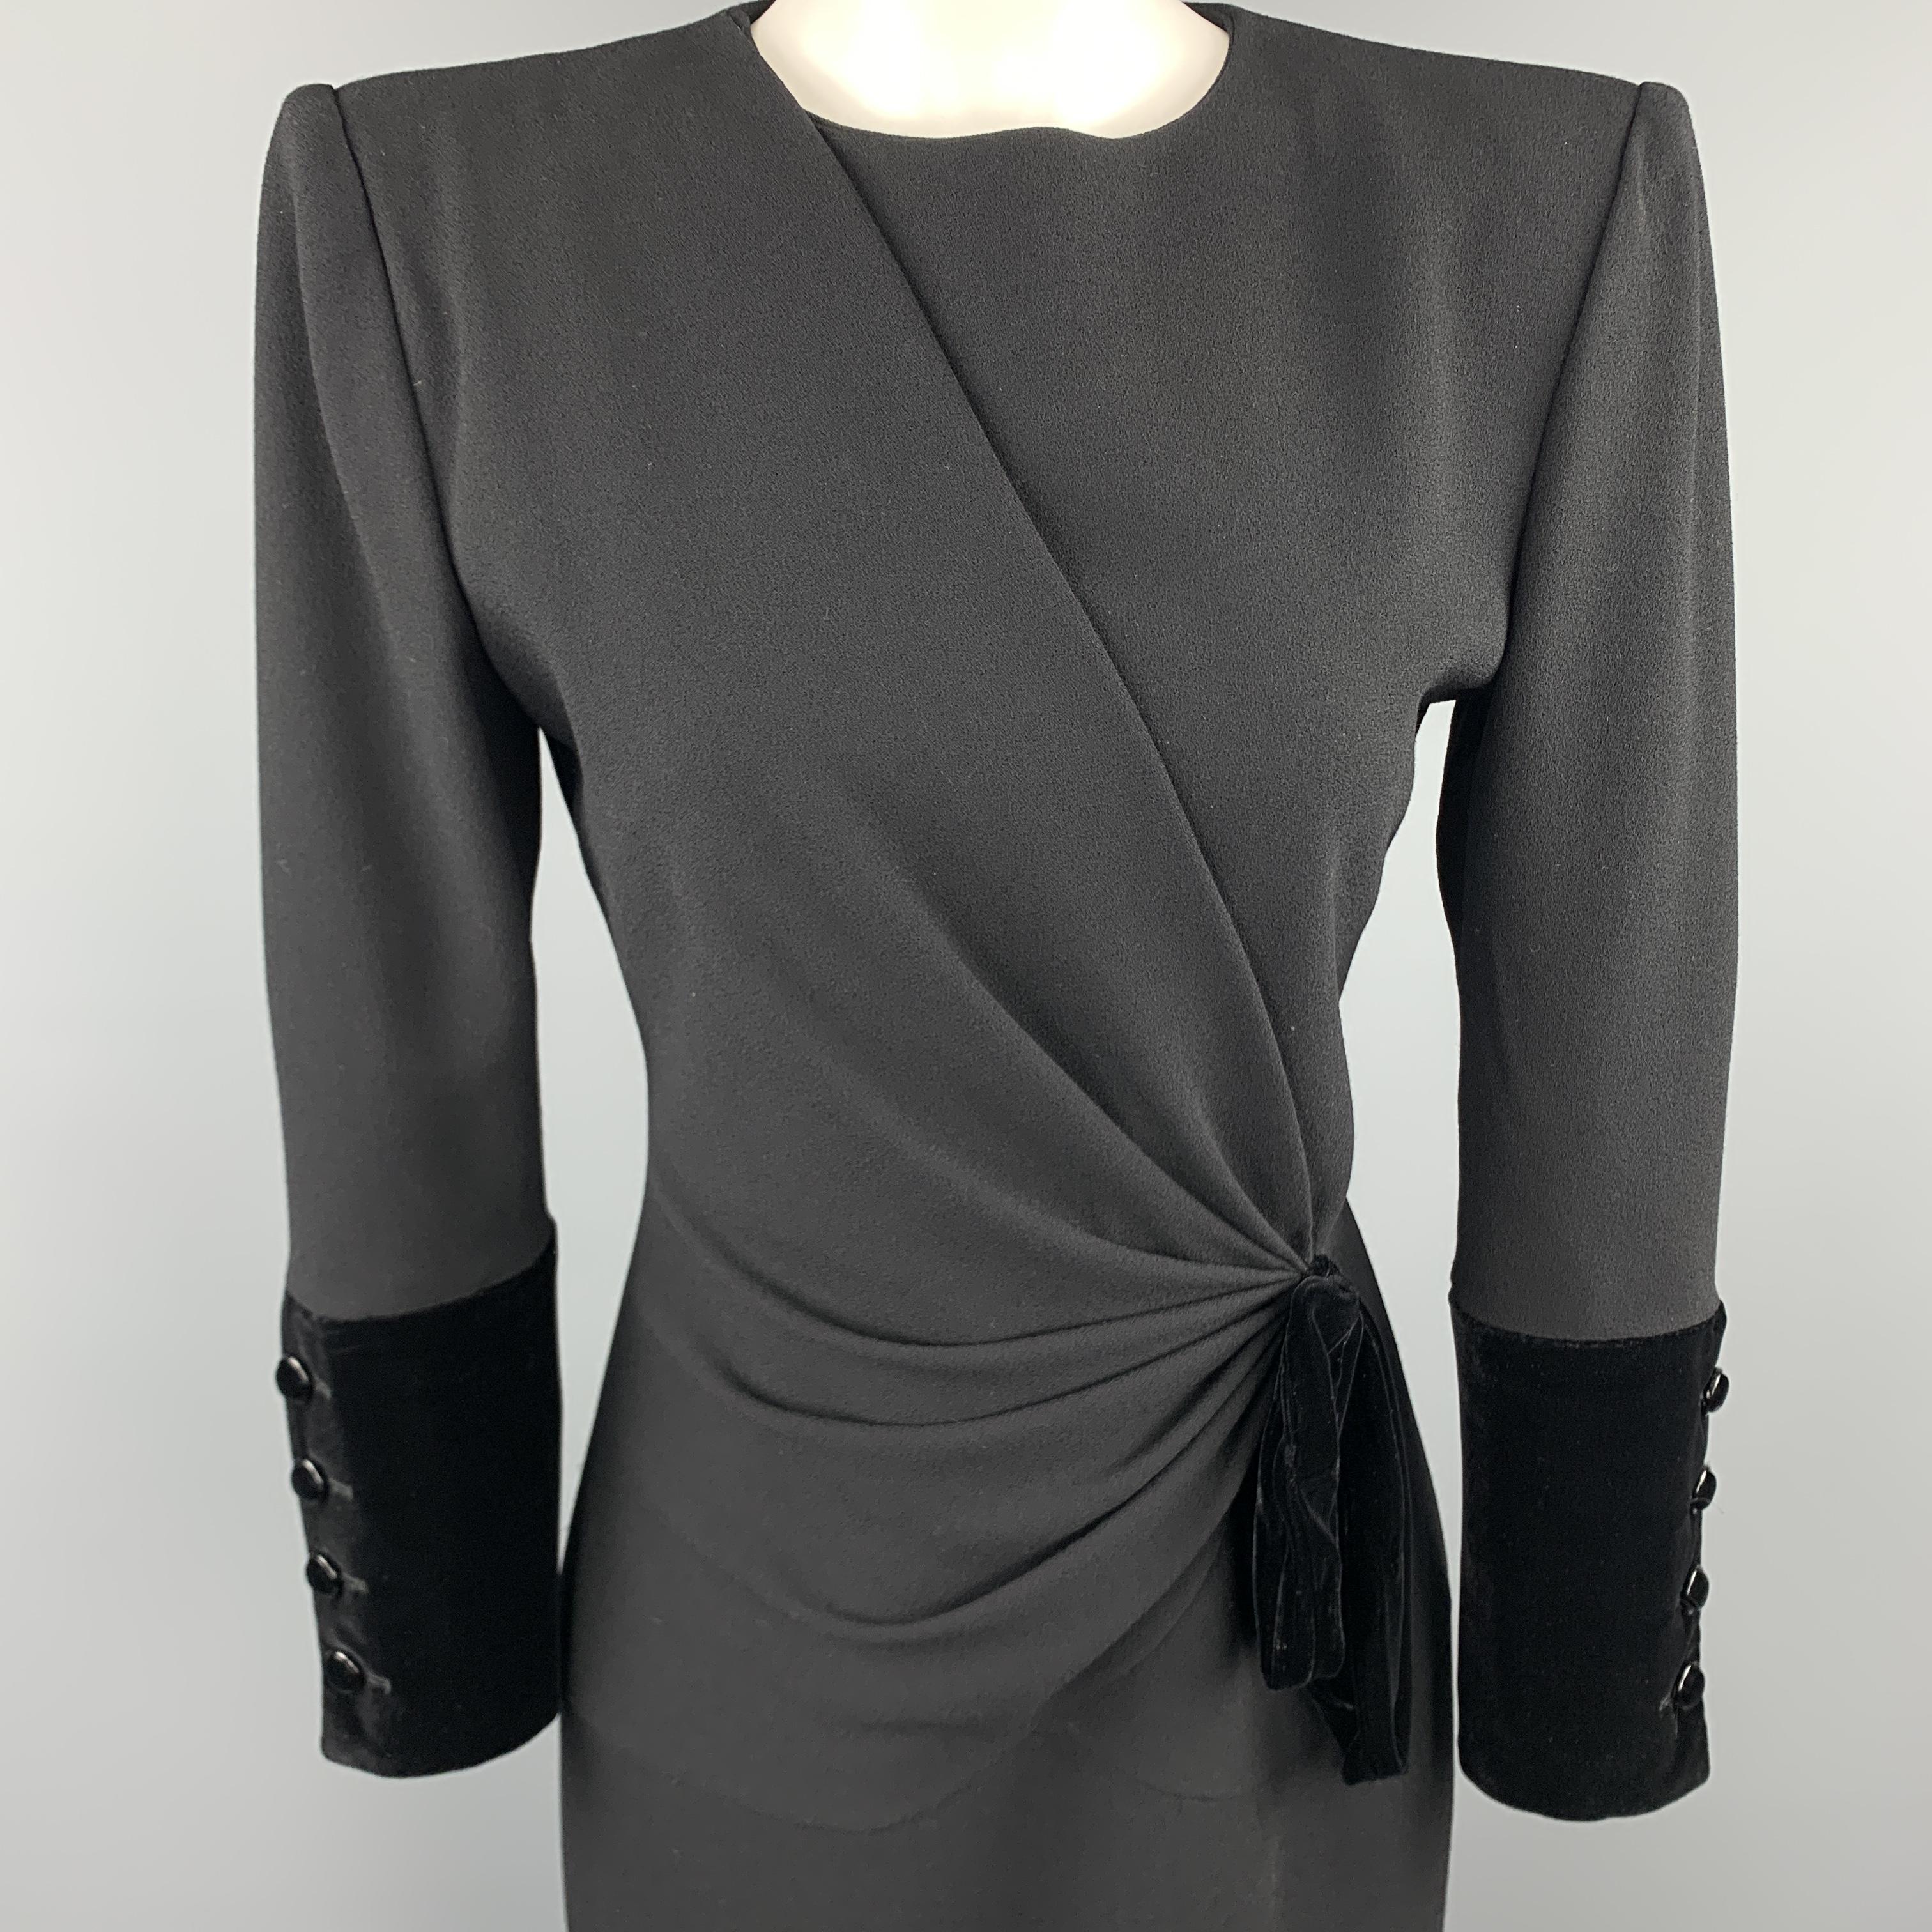 Vintage VALENTINO cocktail dress comes in black crepe with a structured shoulder, high collarless neckline, velvet button cuffs, and asymmetrical draped front with velvet bow accent. Made in Italy.

Excellent Pre-Owned Condition.
Marked: US